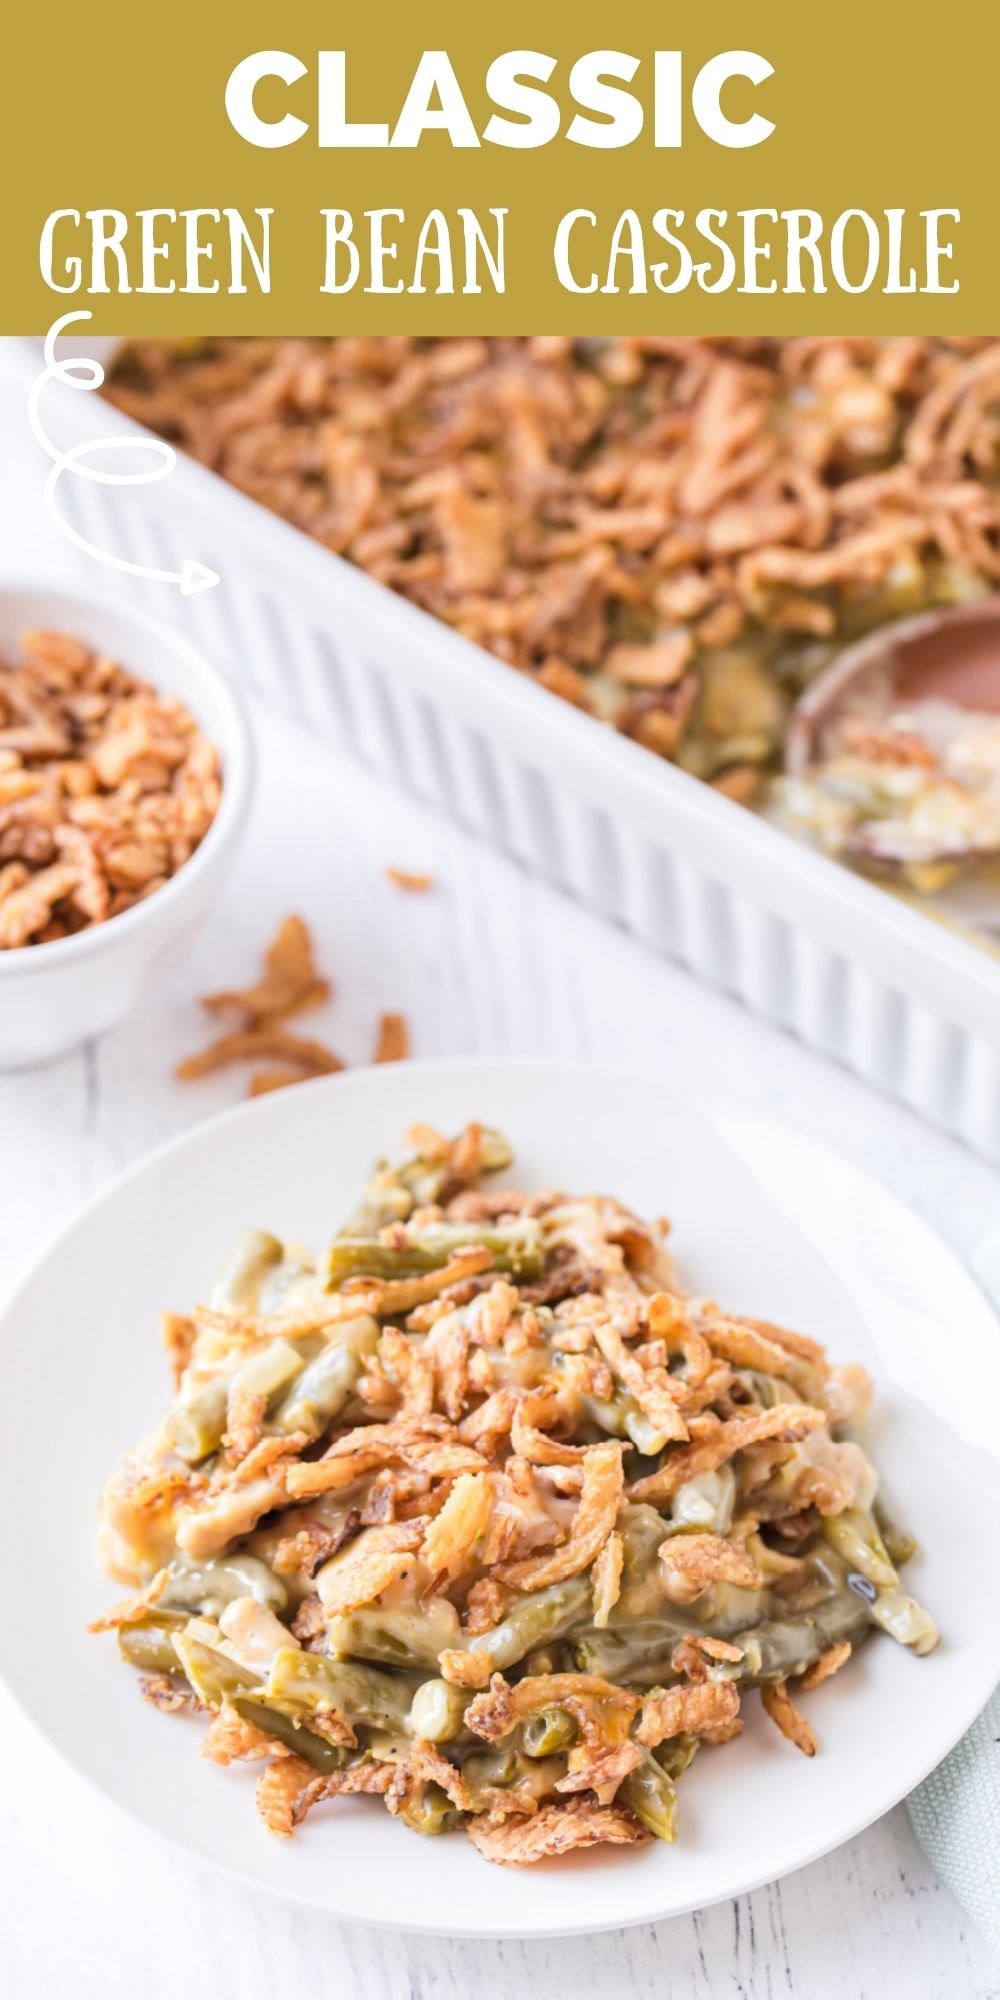 This classic old-fashioned green bean casserole is one holiday dish that shouldn't be off your menu. A simple Christmas recipe, but a favorite. via @familyfresh